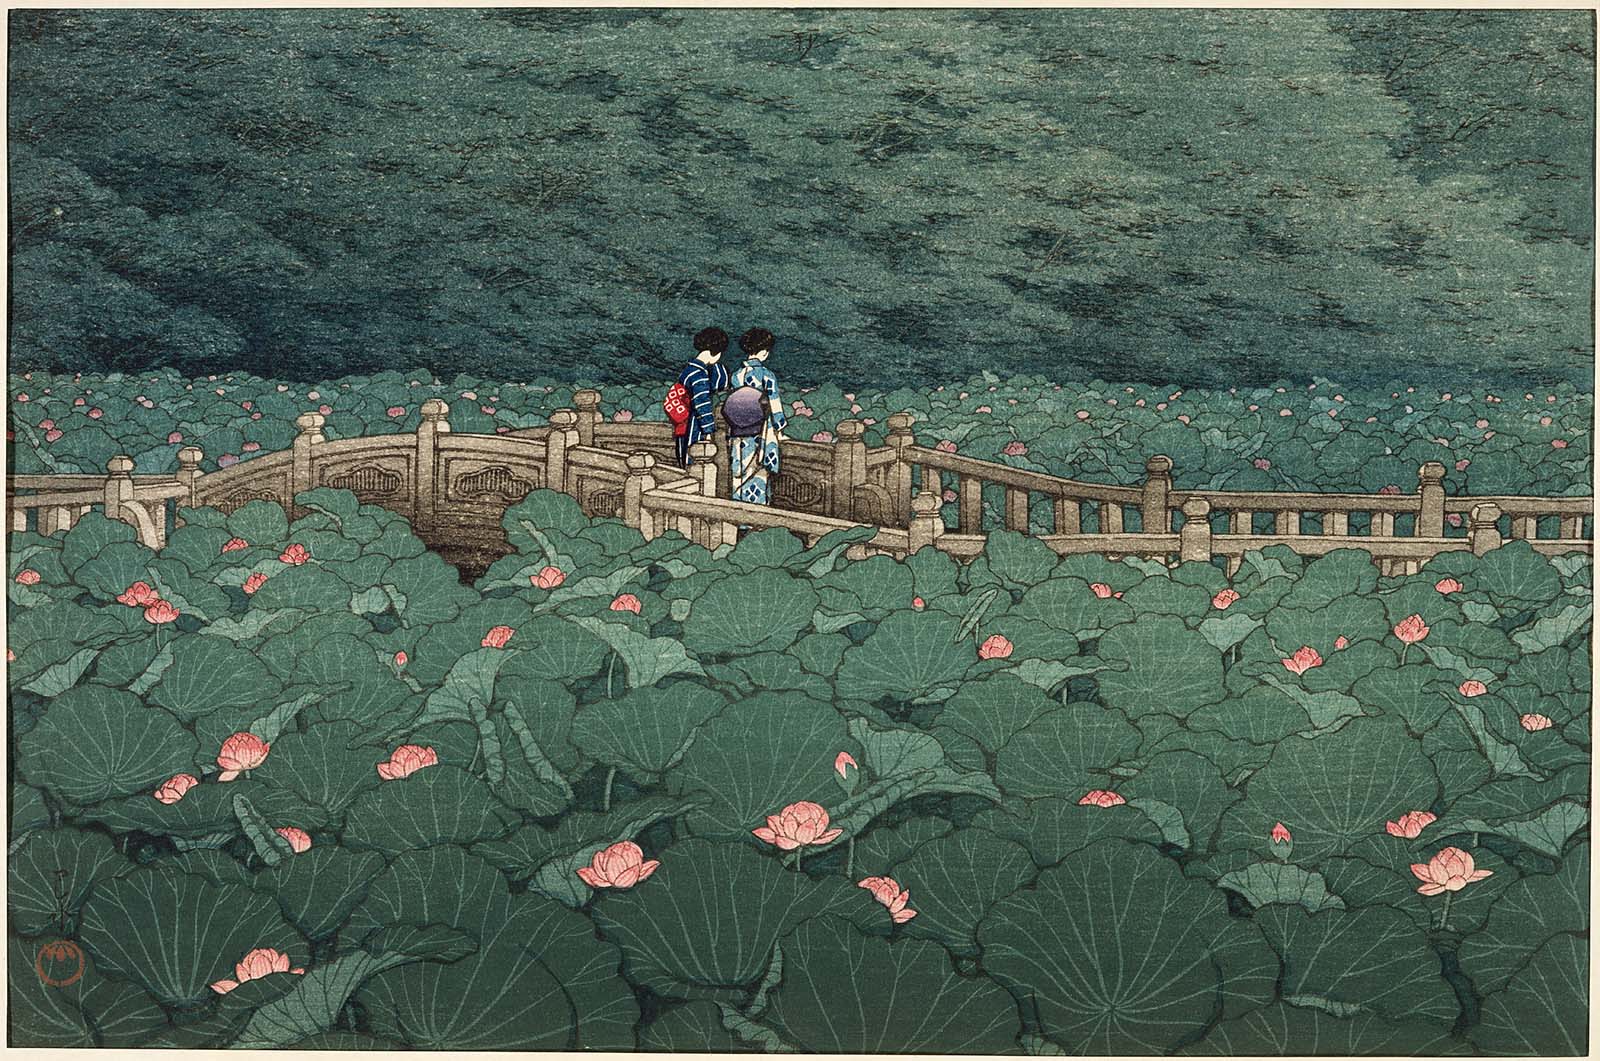 The Pond at Benten Shrine in Shiba by Hasui Kawase - 1929 - 27.3 x 39.8 cm Museum of Fine Arts Boston